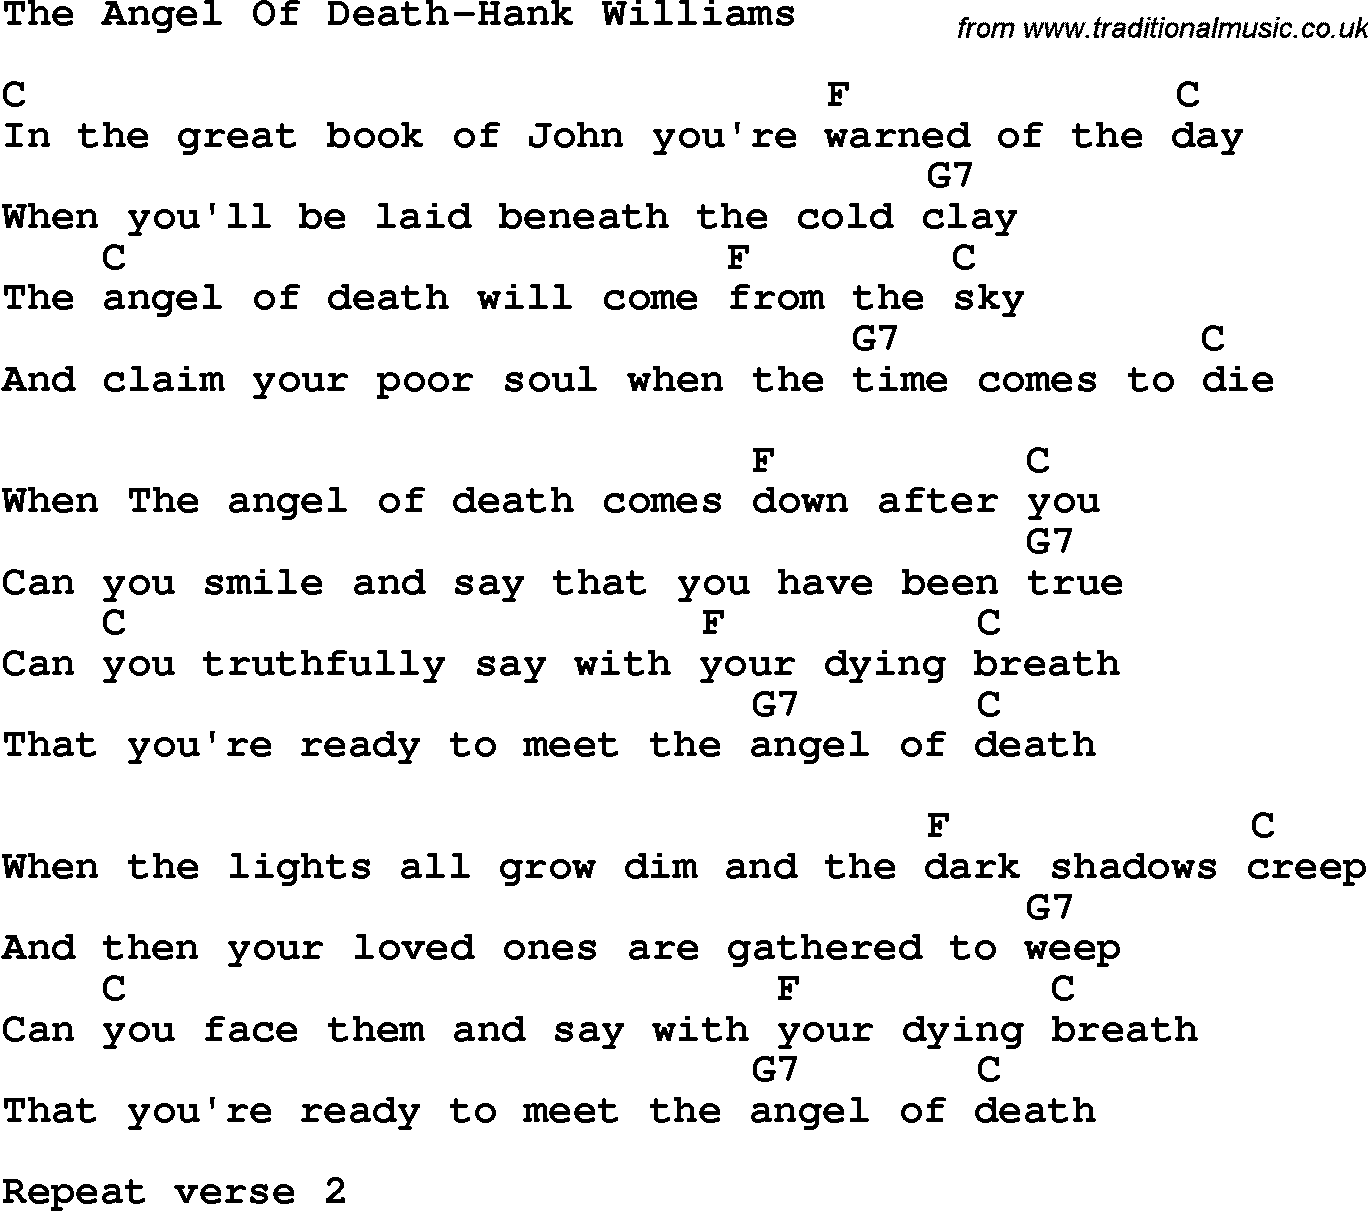 Country, Southern and Bluegrass Gospel Song The Angel Of Death-Hank Williams lyrics and chords